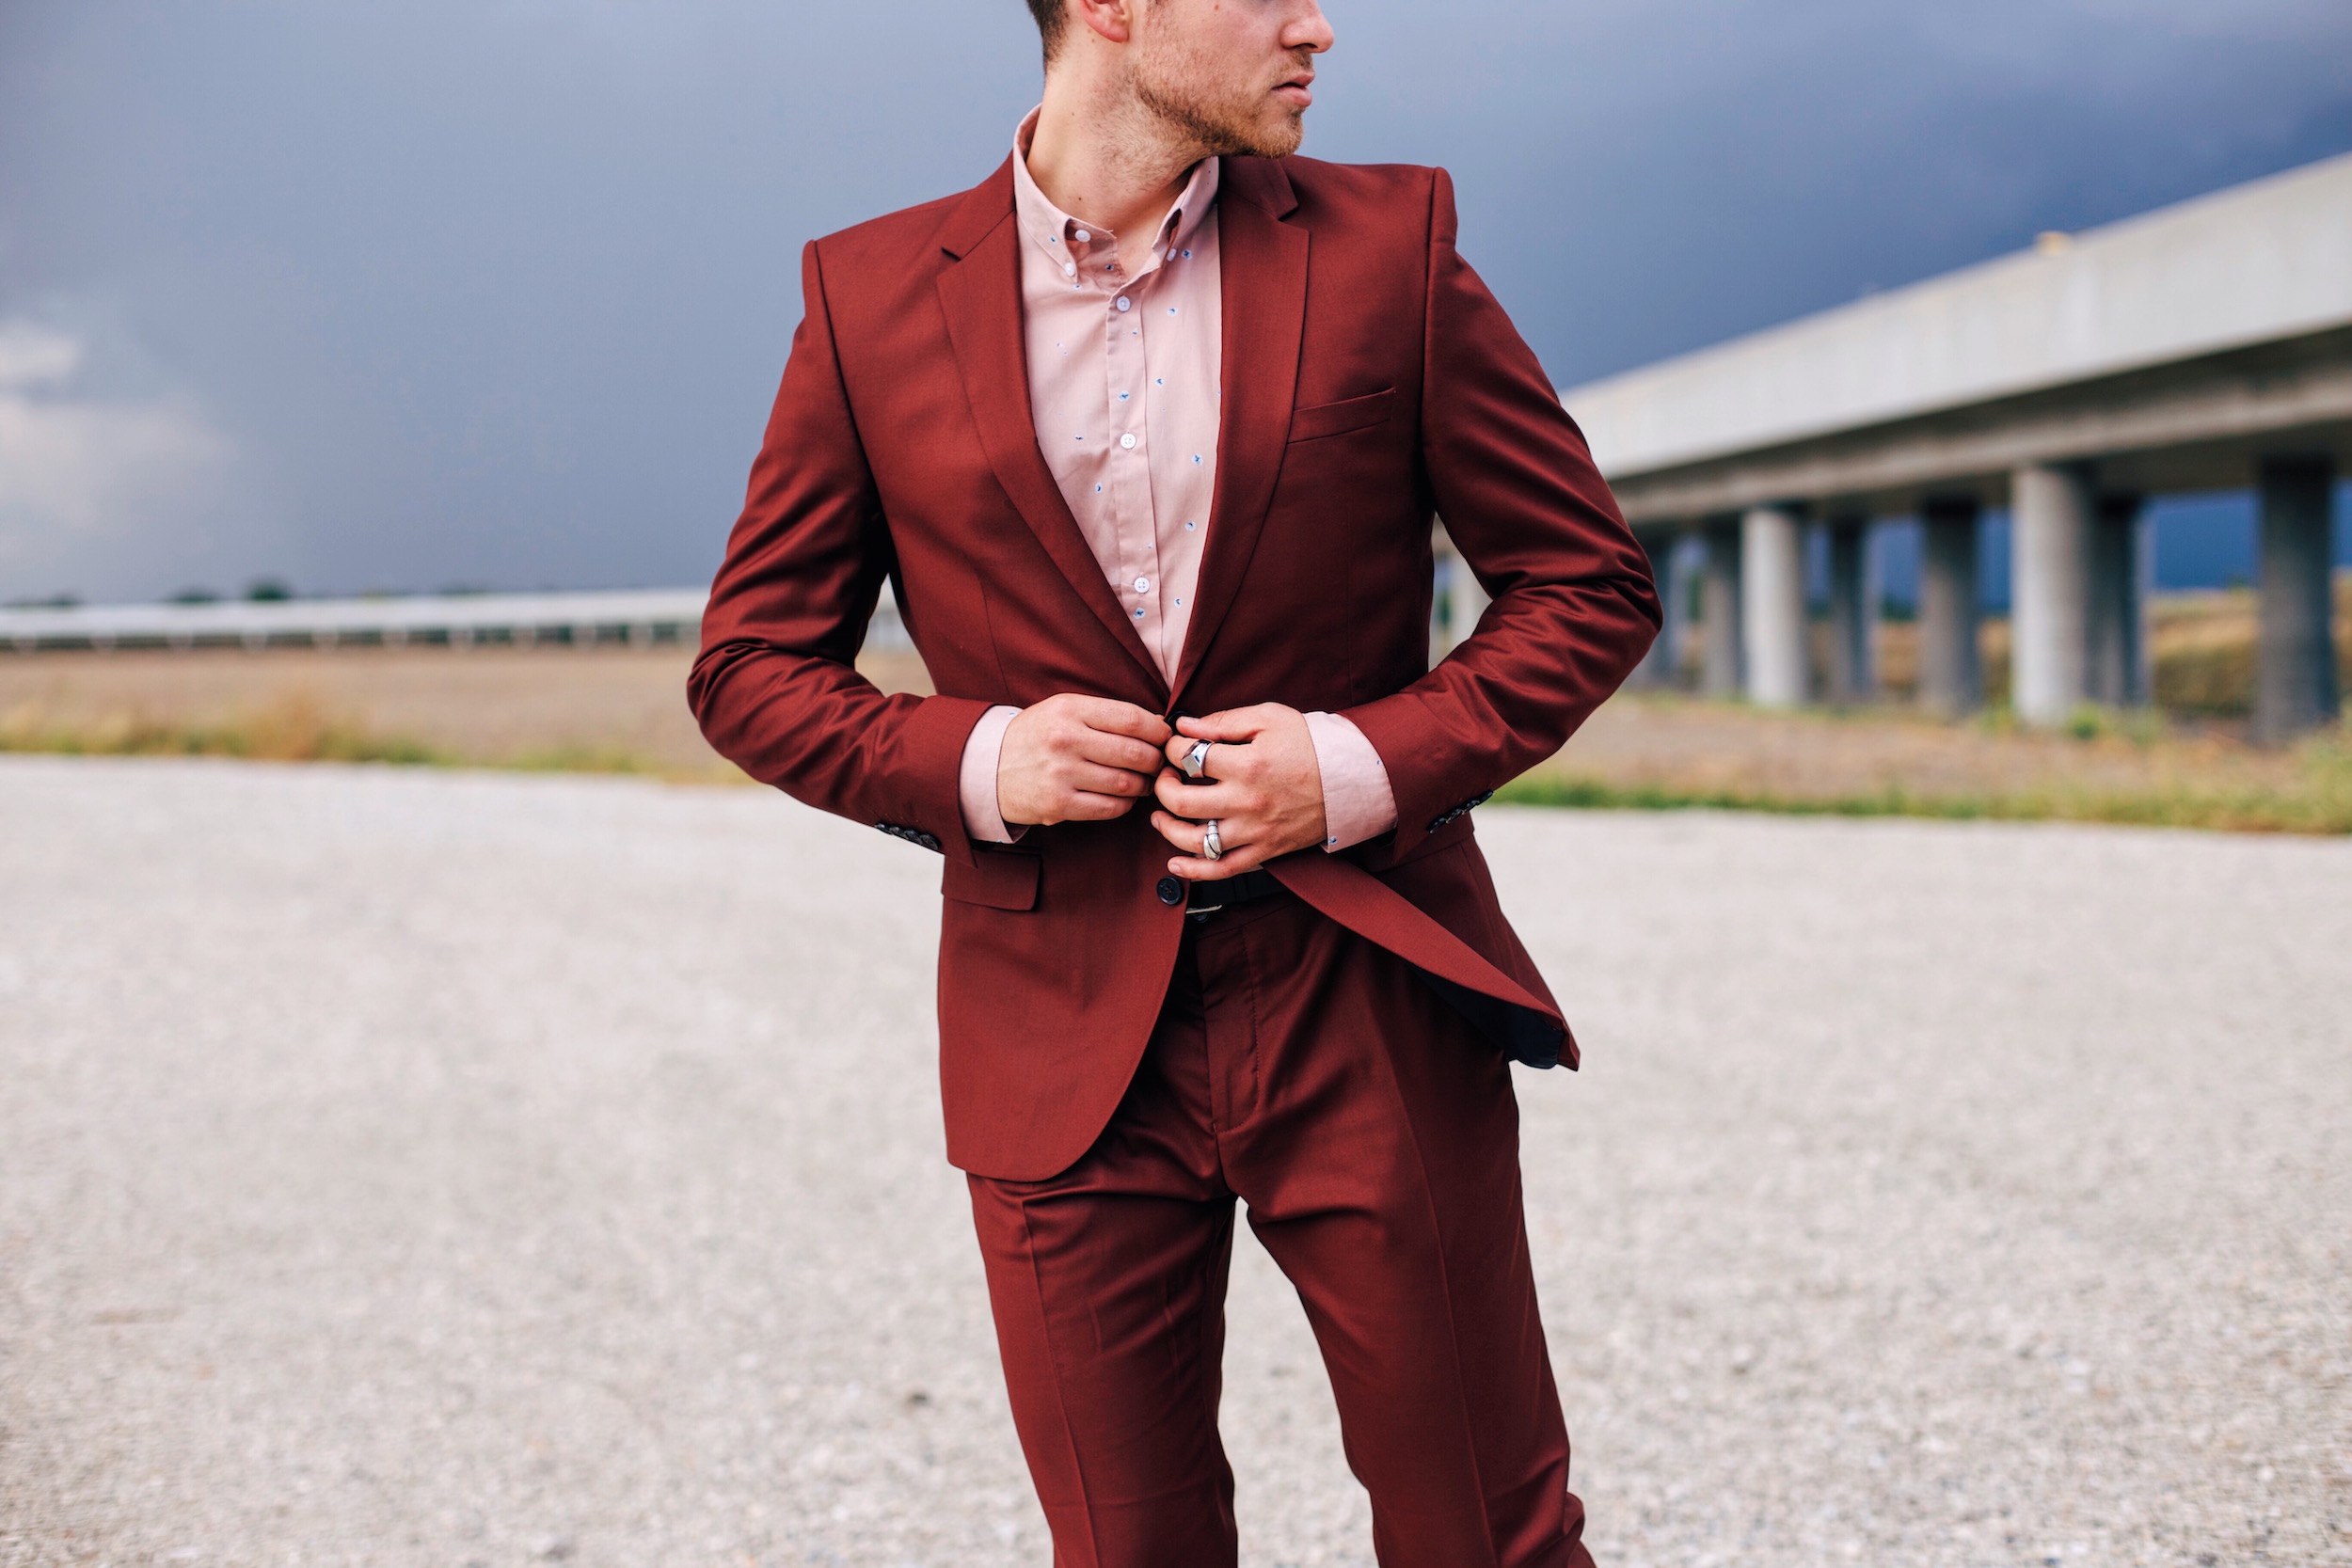 How to wear a Red Suit - Menswear Trends with Zalando